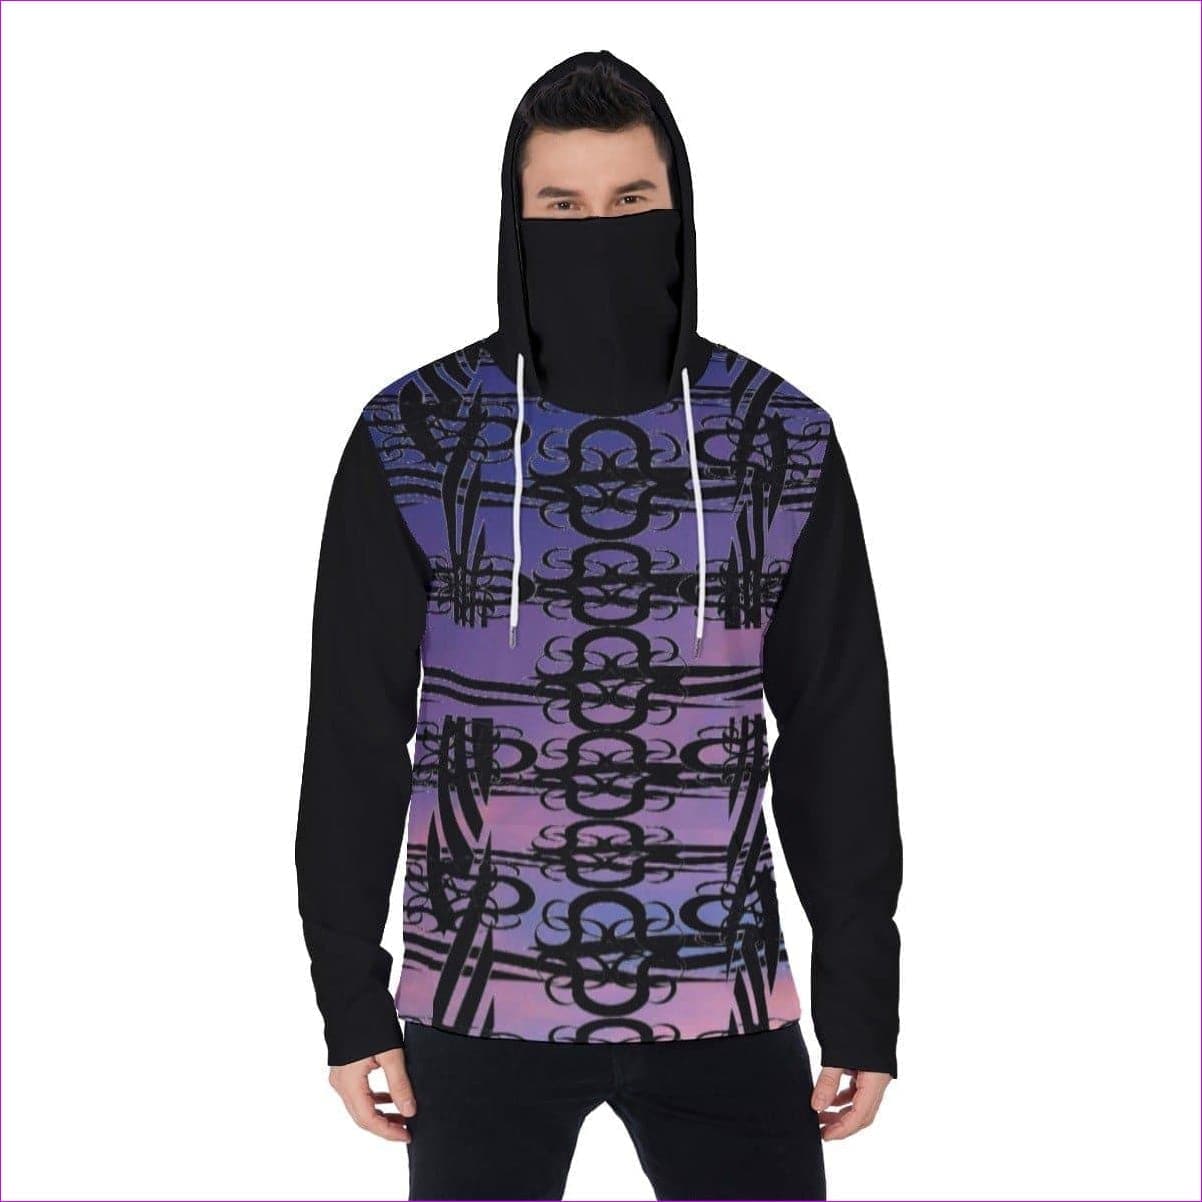 Midnight Aros Unisex Pullover Hoodie With Mask - Black - Men's Hoodies at TFC&H Co.